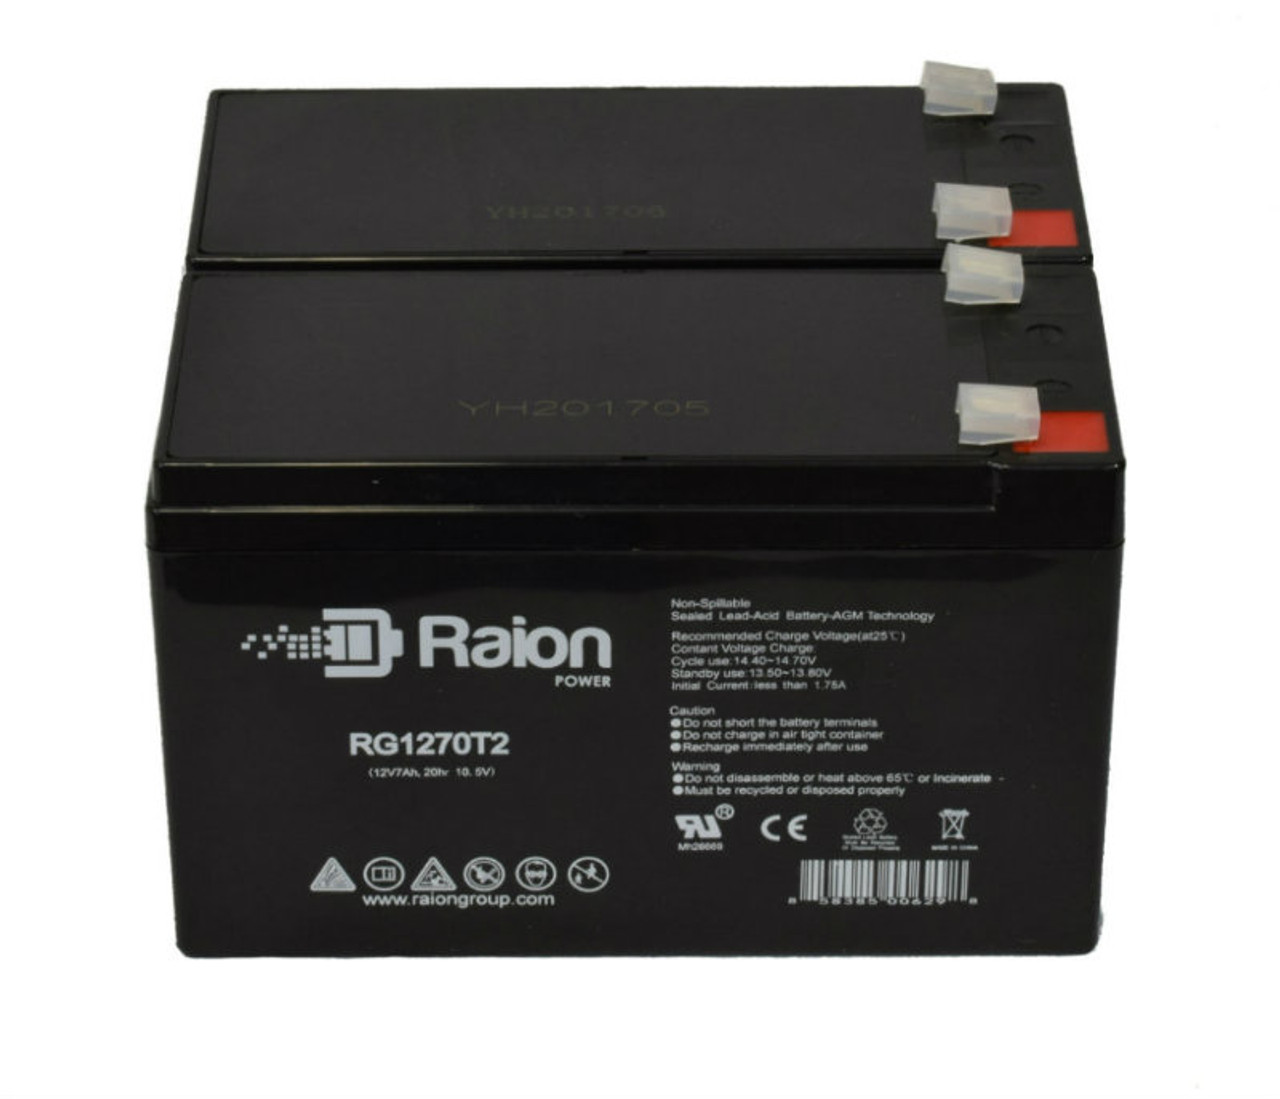 Raion Power Replacement 12V 7Ah Battery for Handicare Xclusive Stairlift - 2 Pack